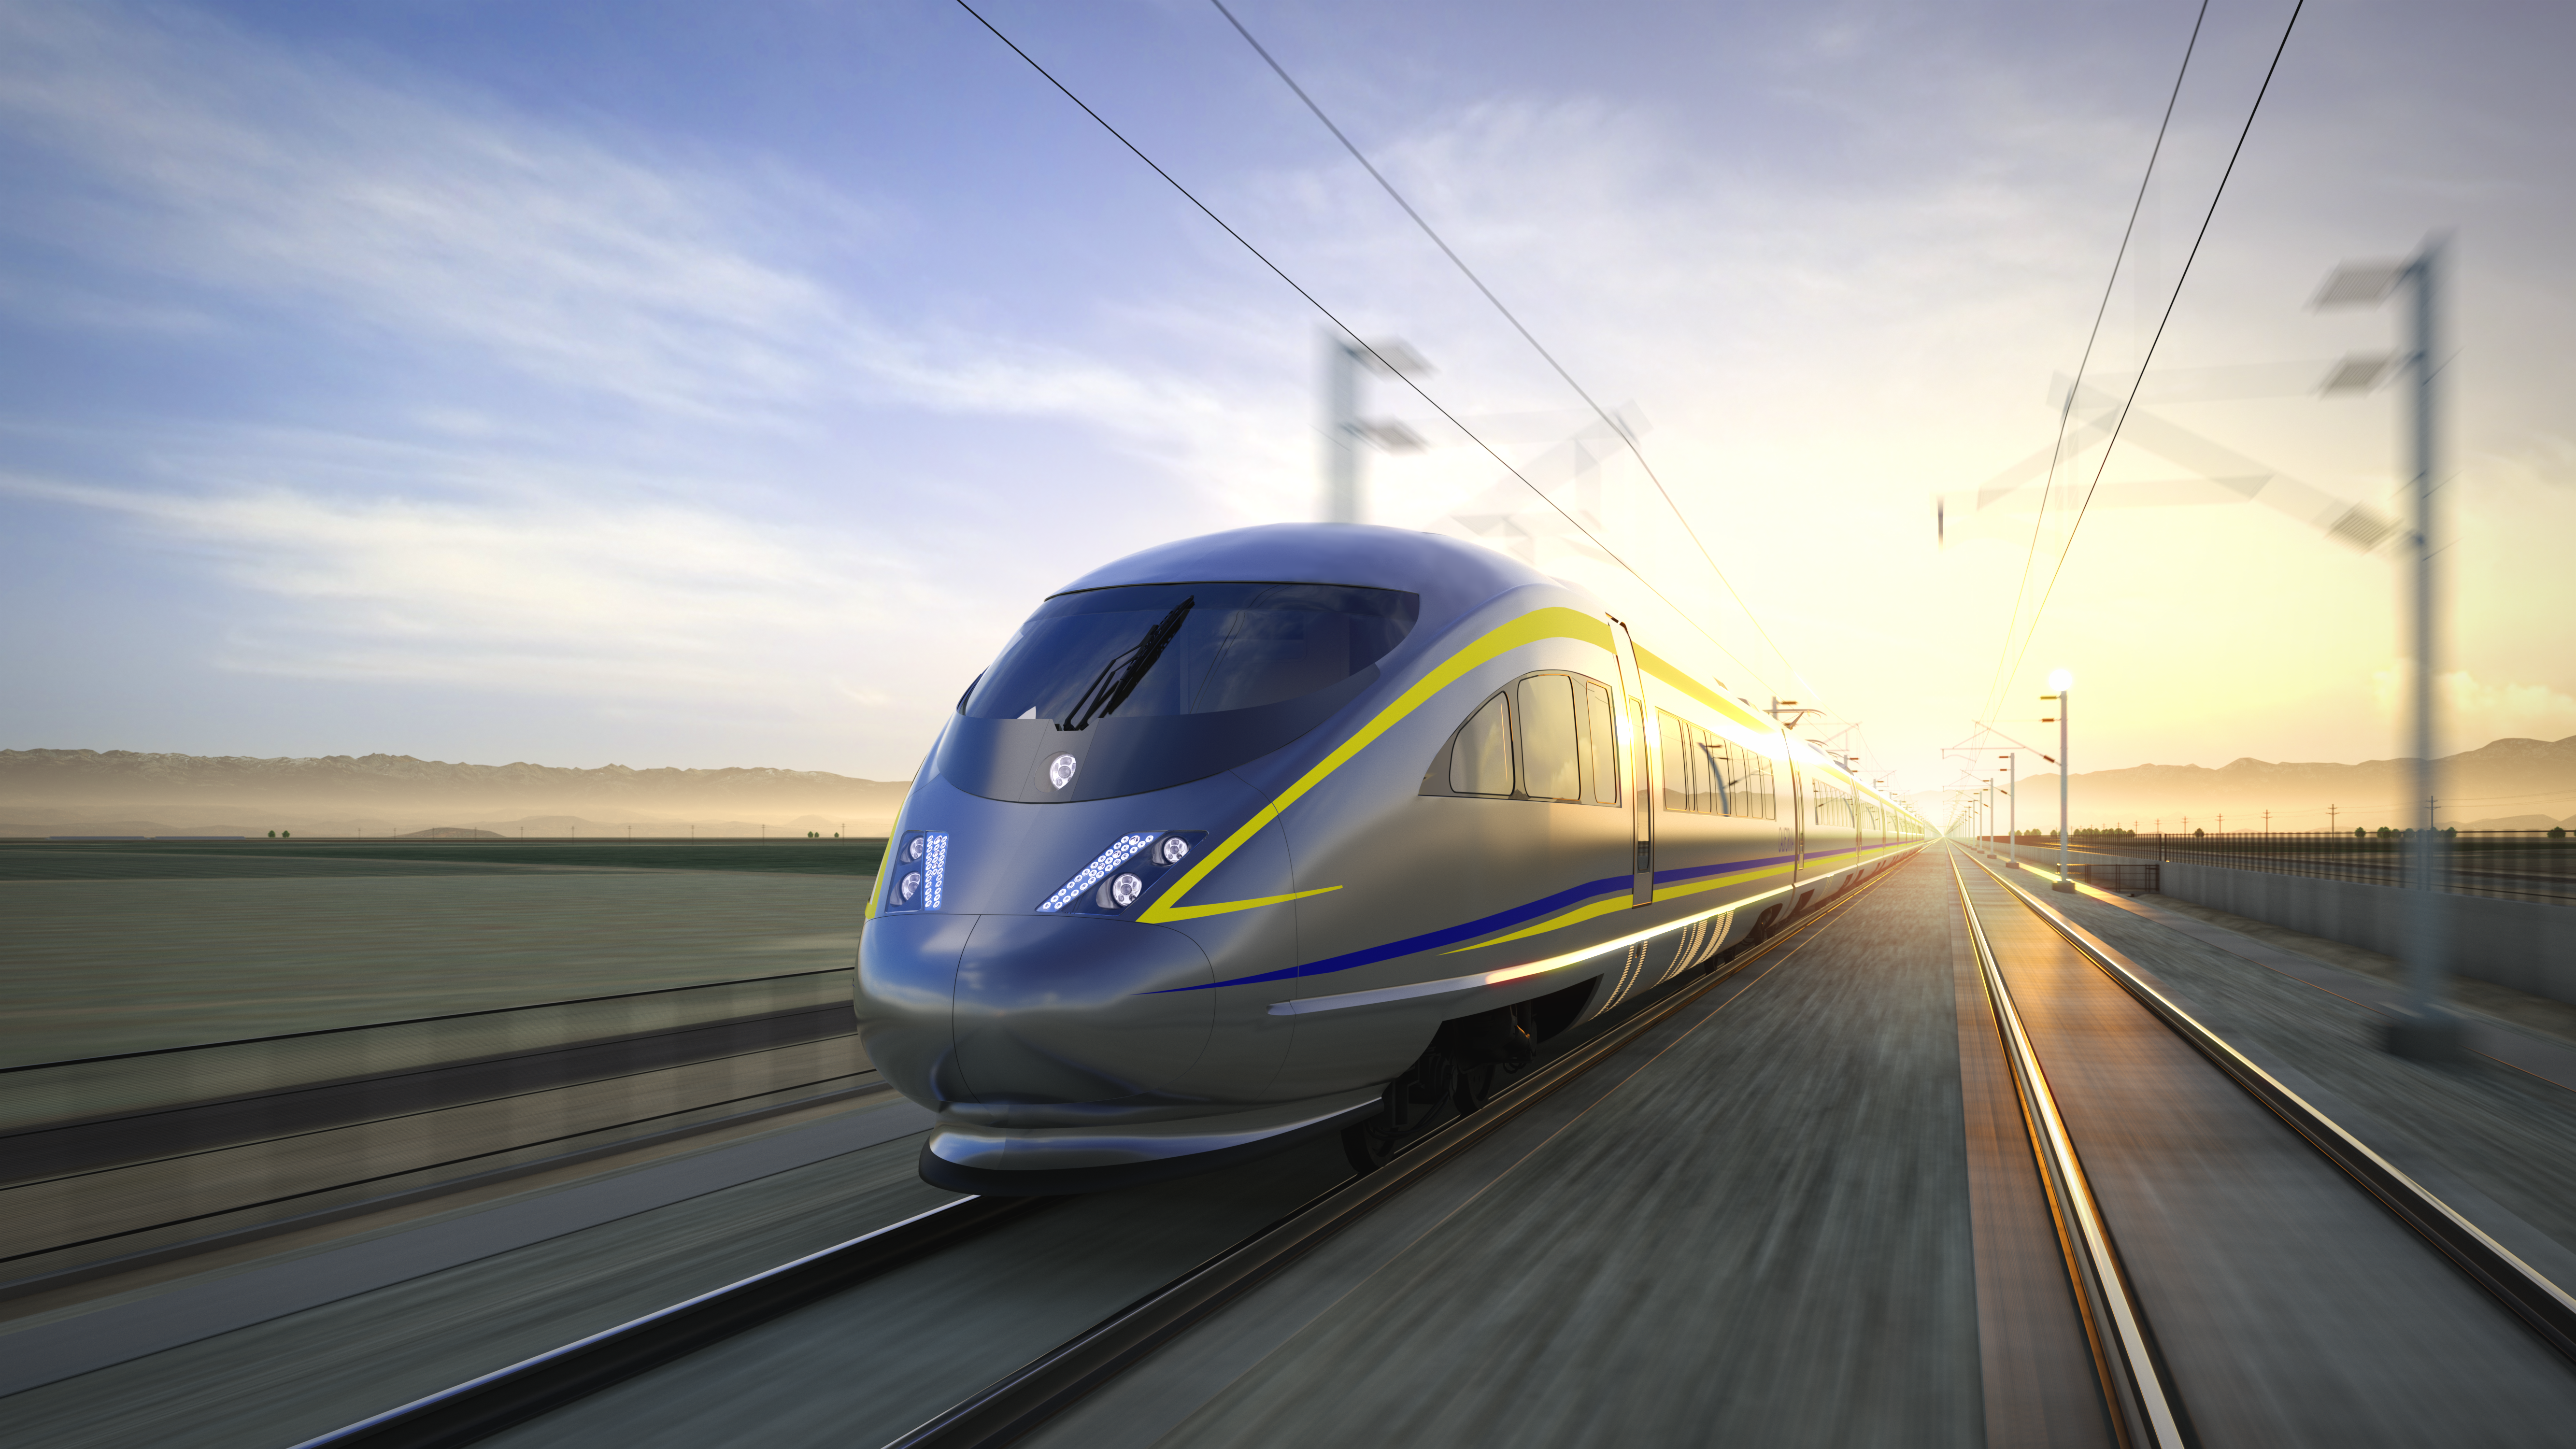 California High-Speed Rail Authority Releases RFQ for Track and Systems Design